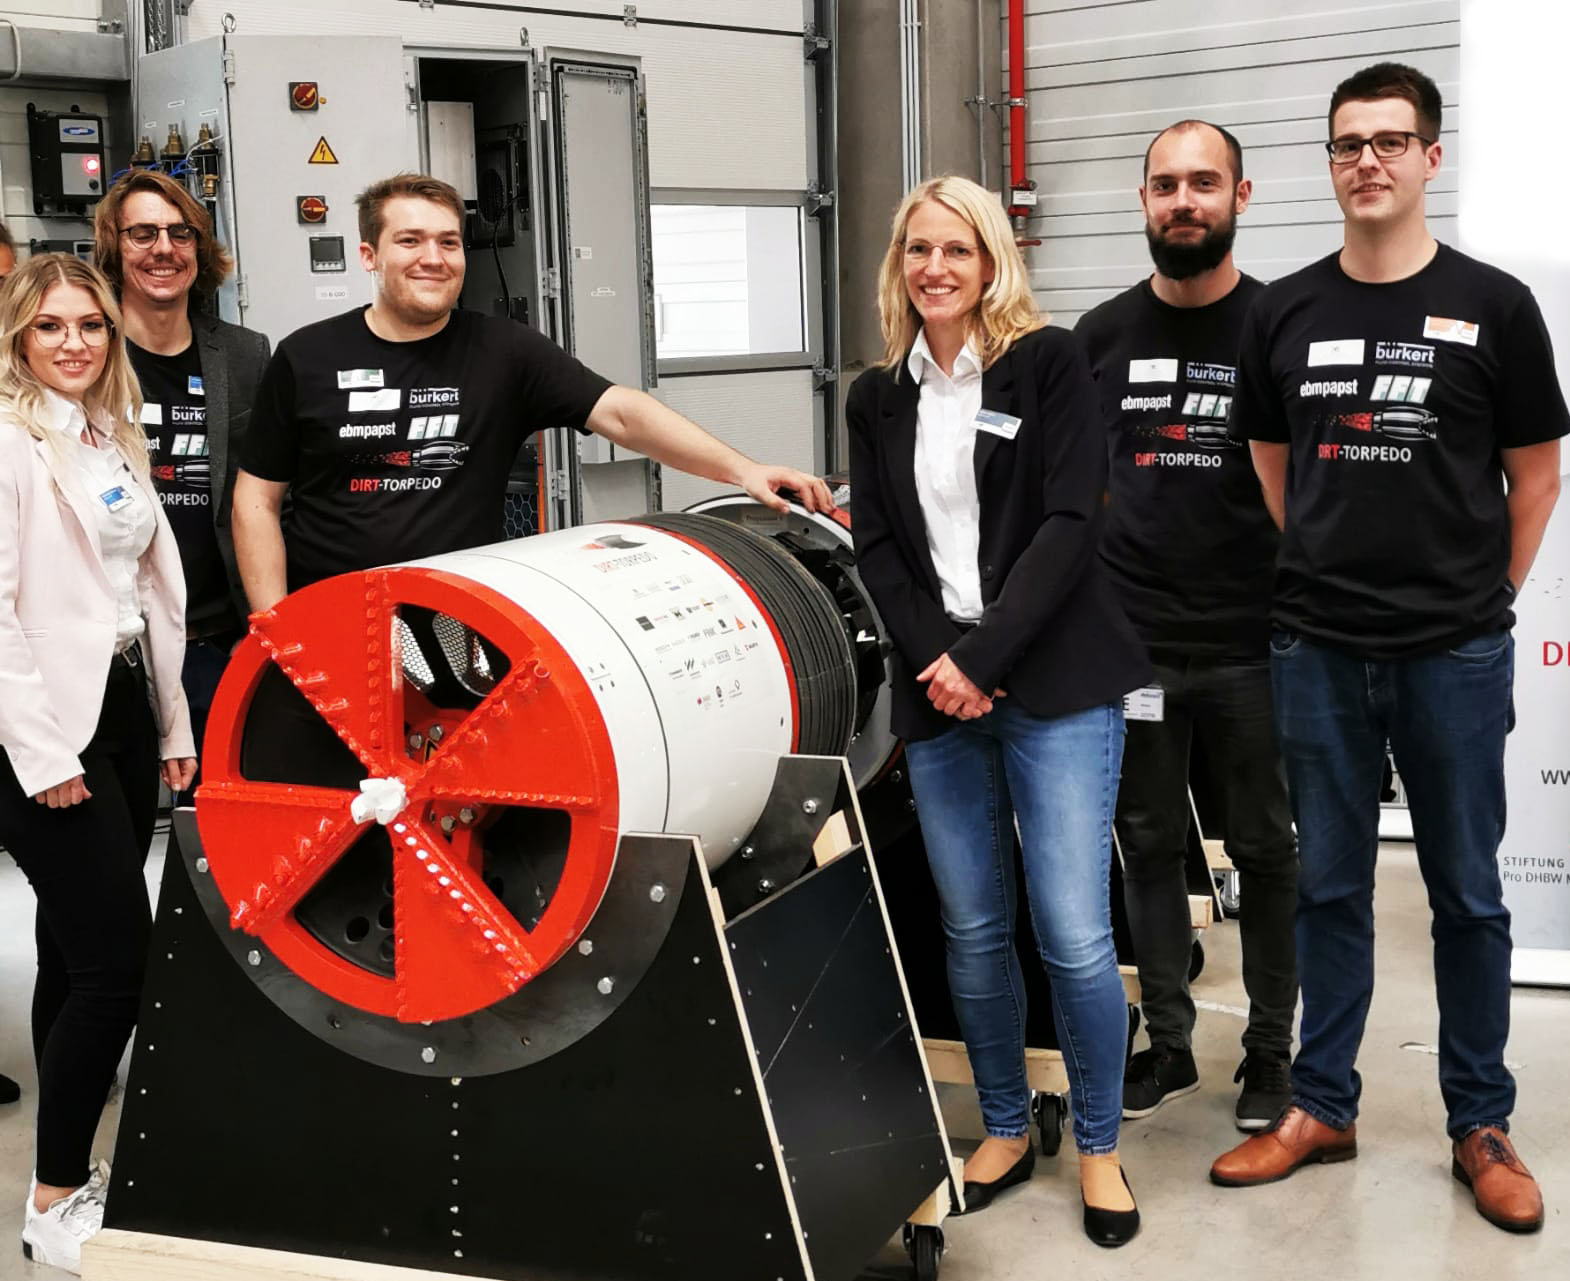 The coax® project team with part of the Dirt Torpedo team at the launch event